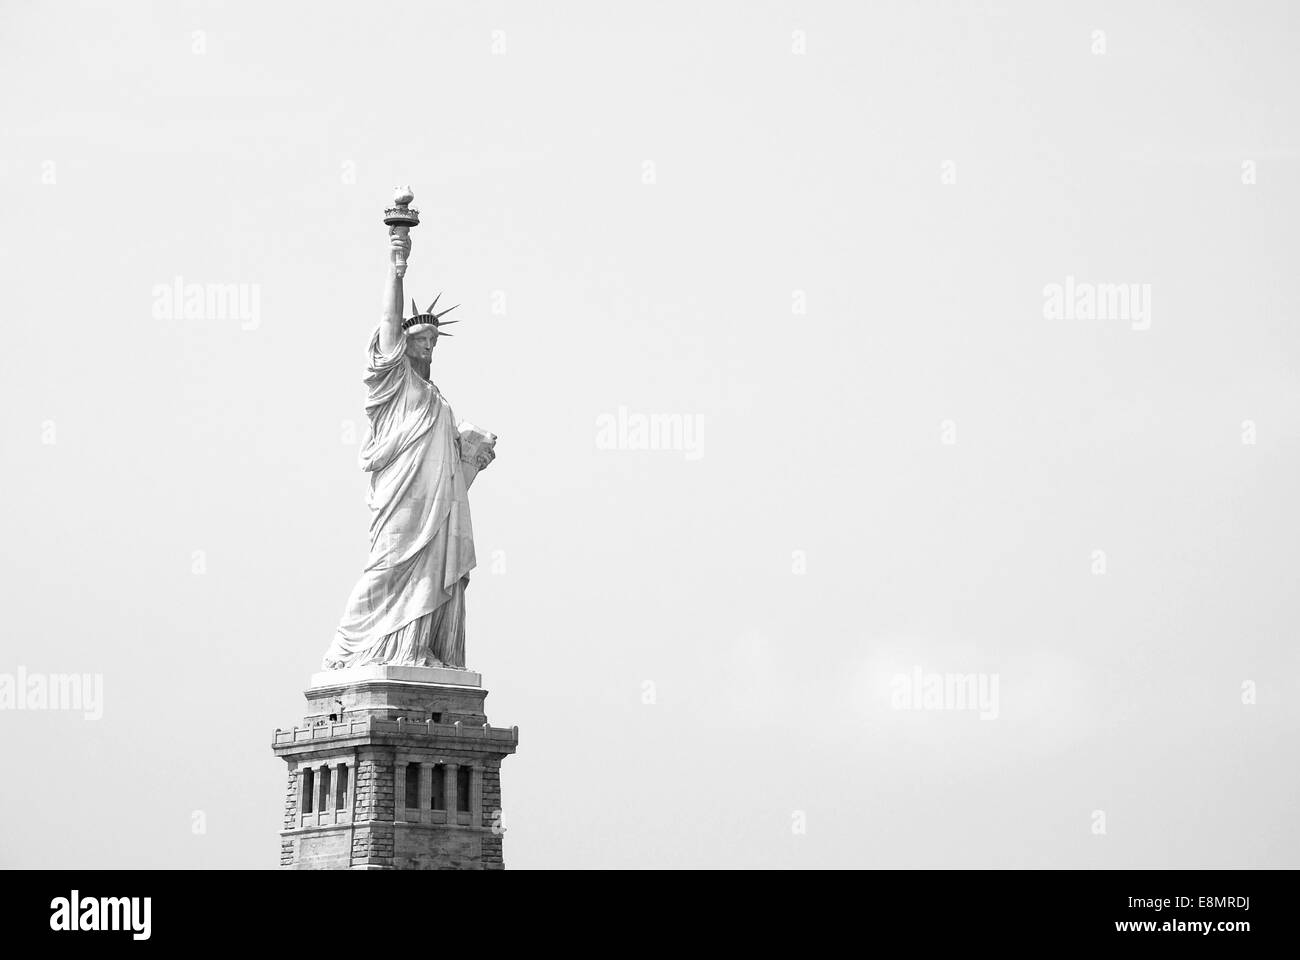 The Statue of Liberty stands proudly against a clear sky - monochrome processing Stock Photo